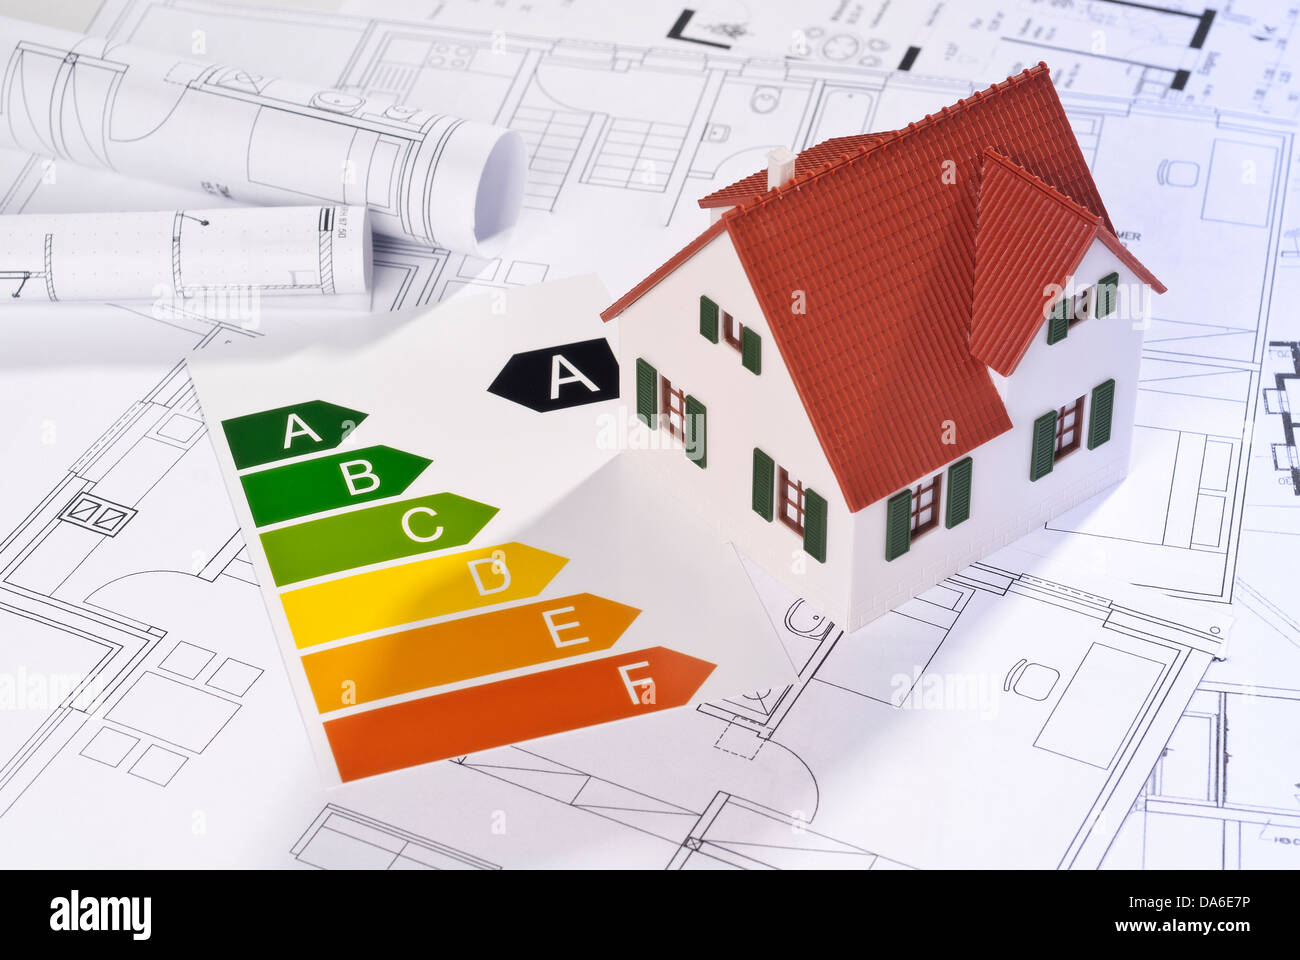 Energy efficiency label with architectural model and blueprints. Stock Photo